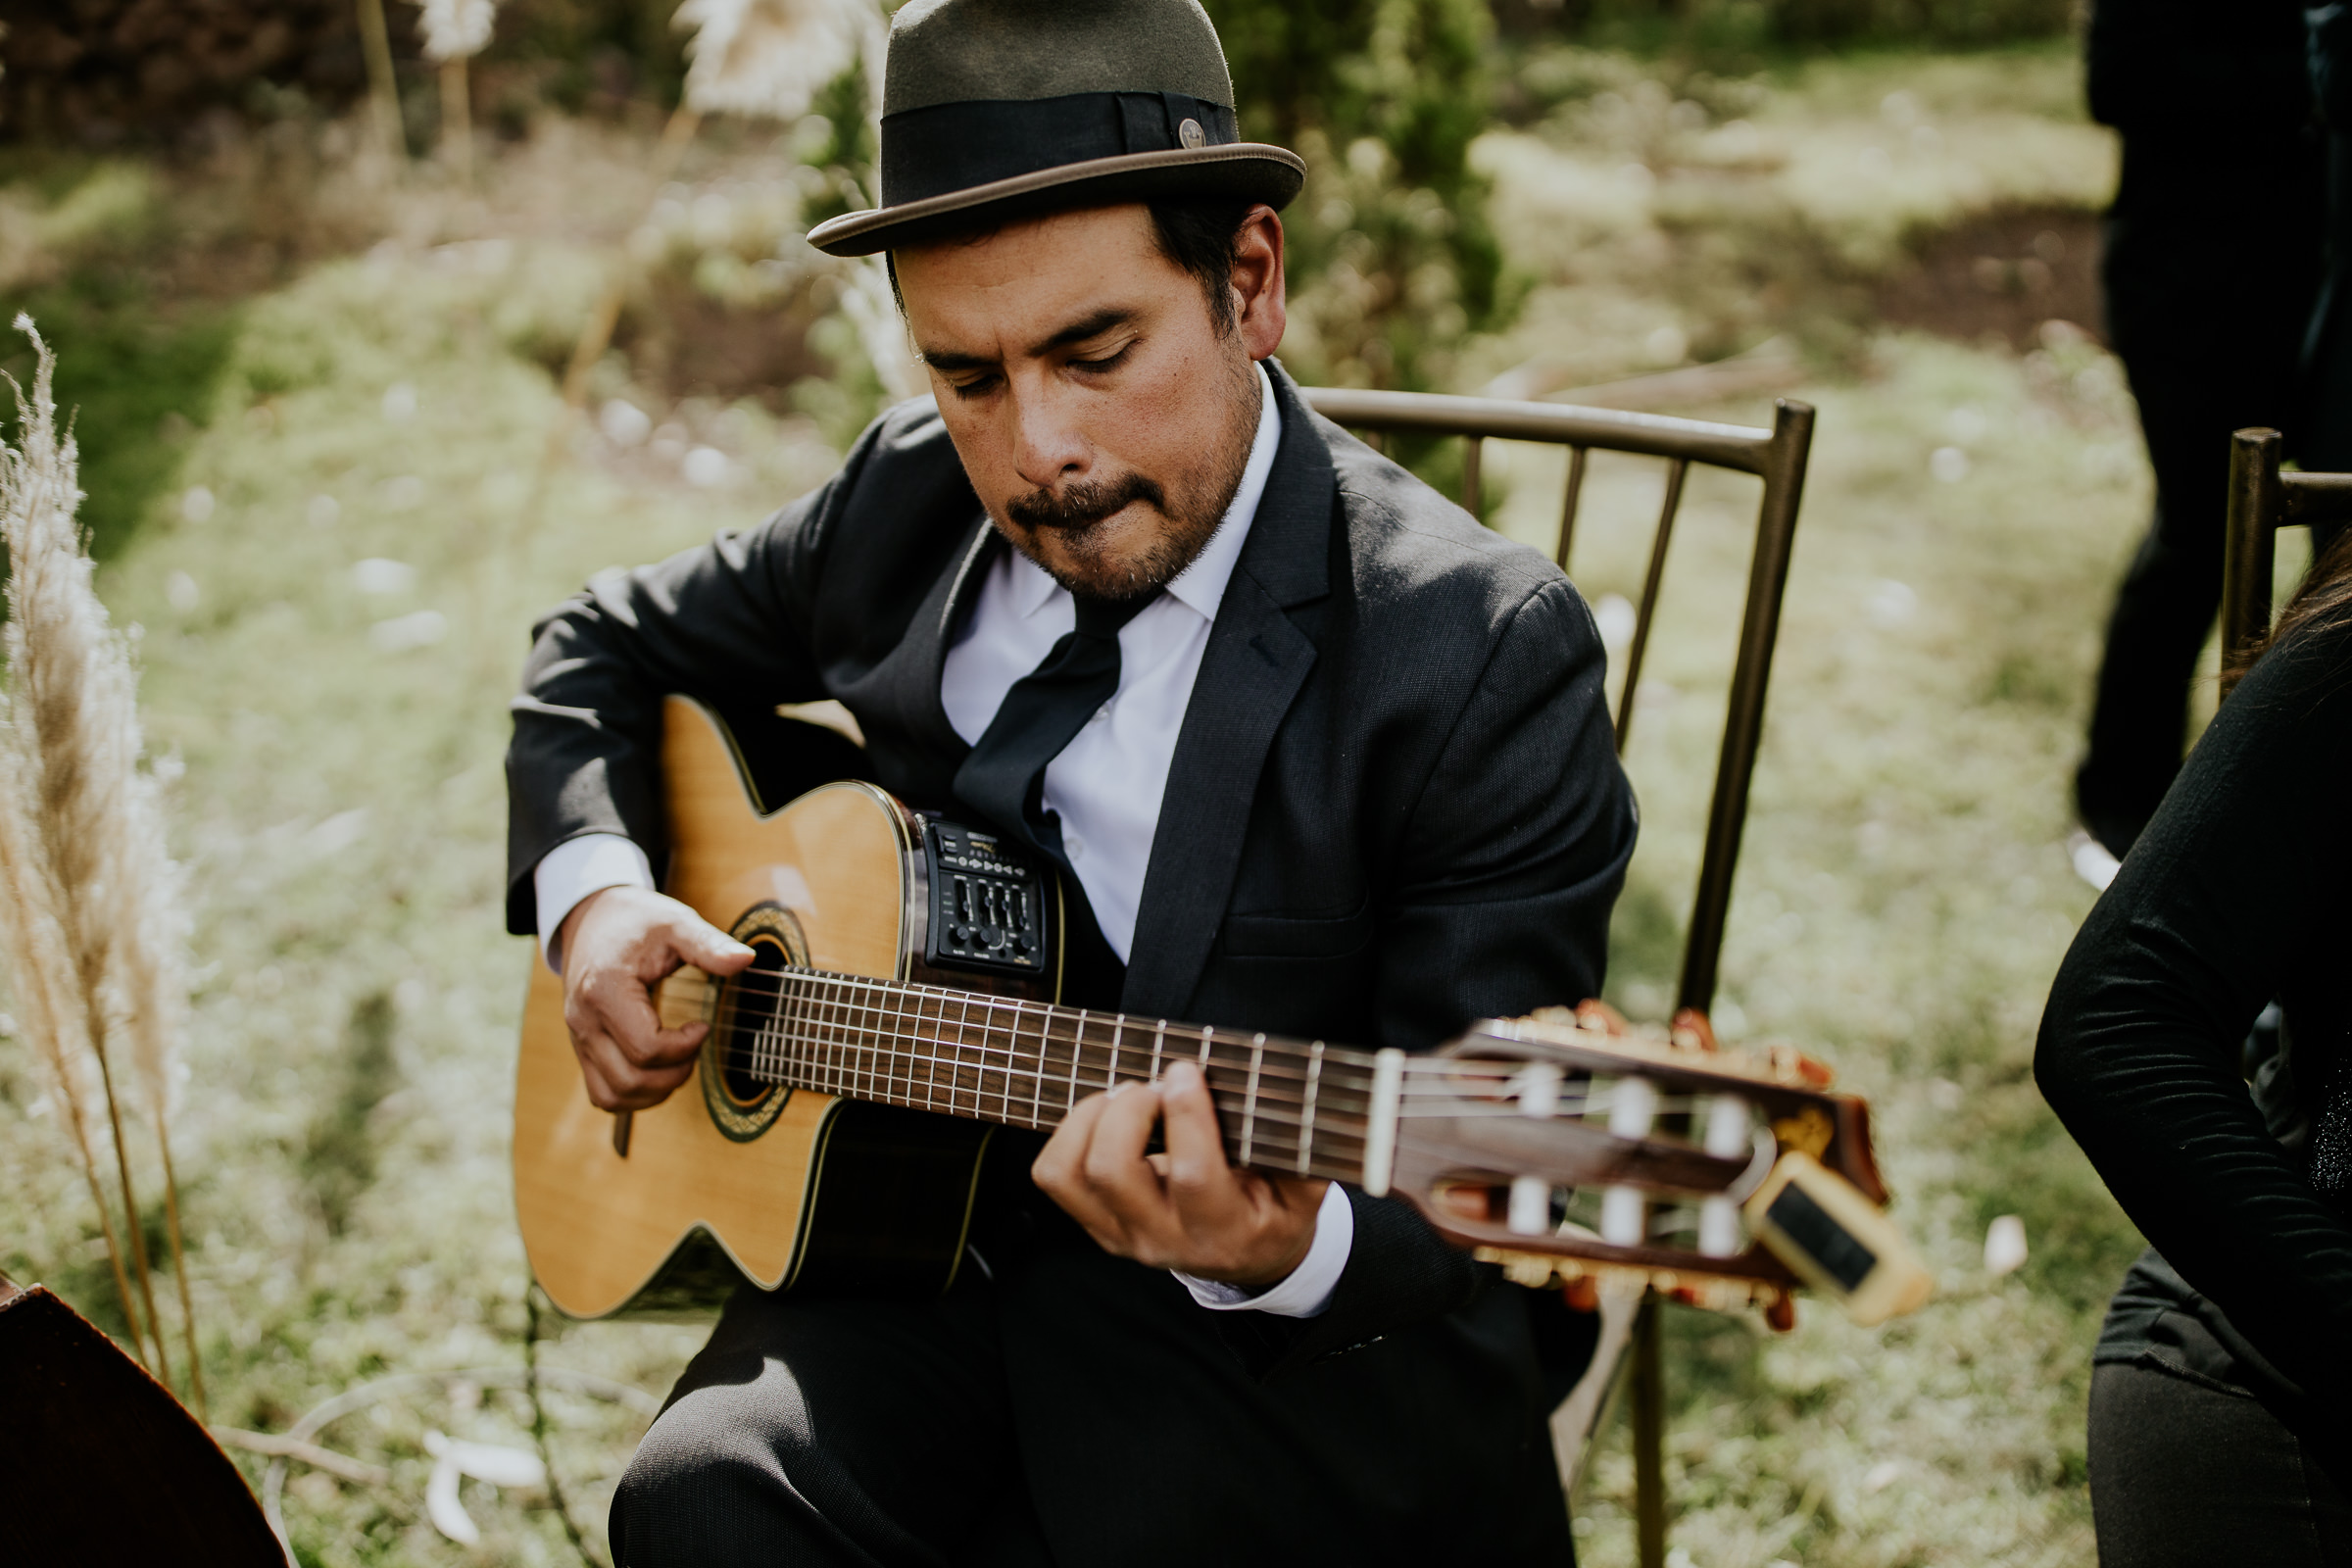 man playing guitar at a wedding ceremony